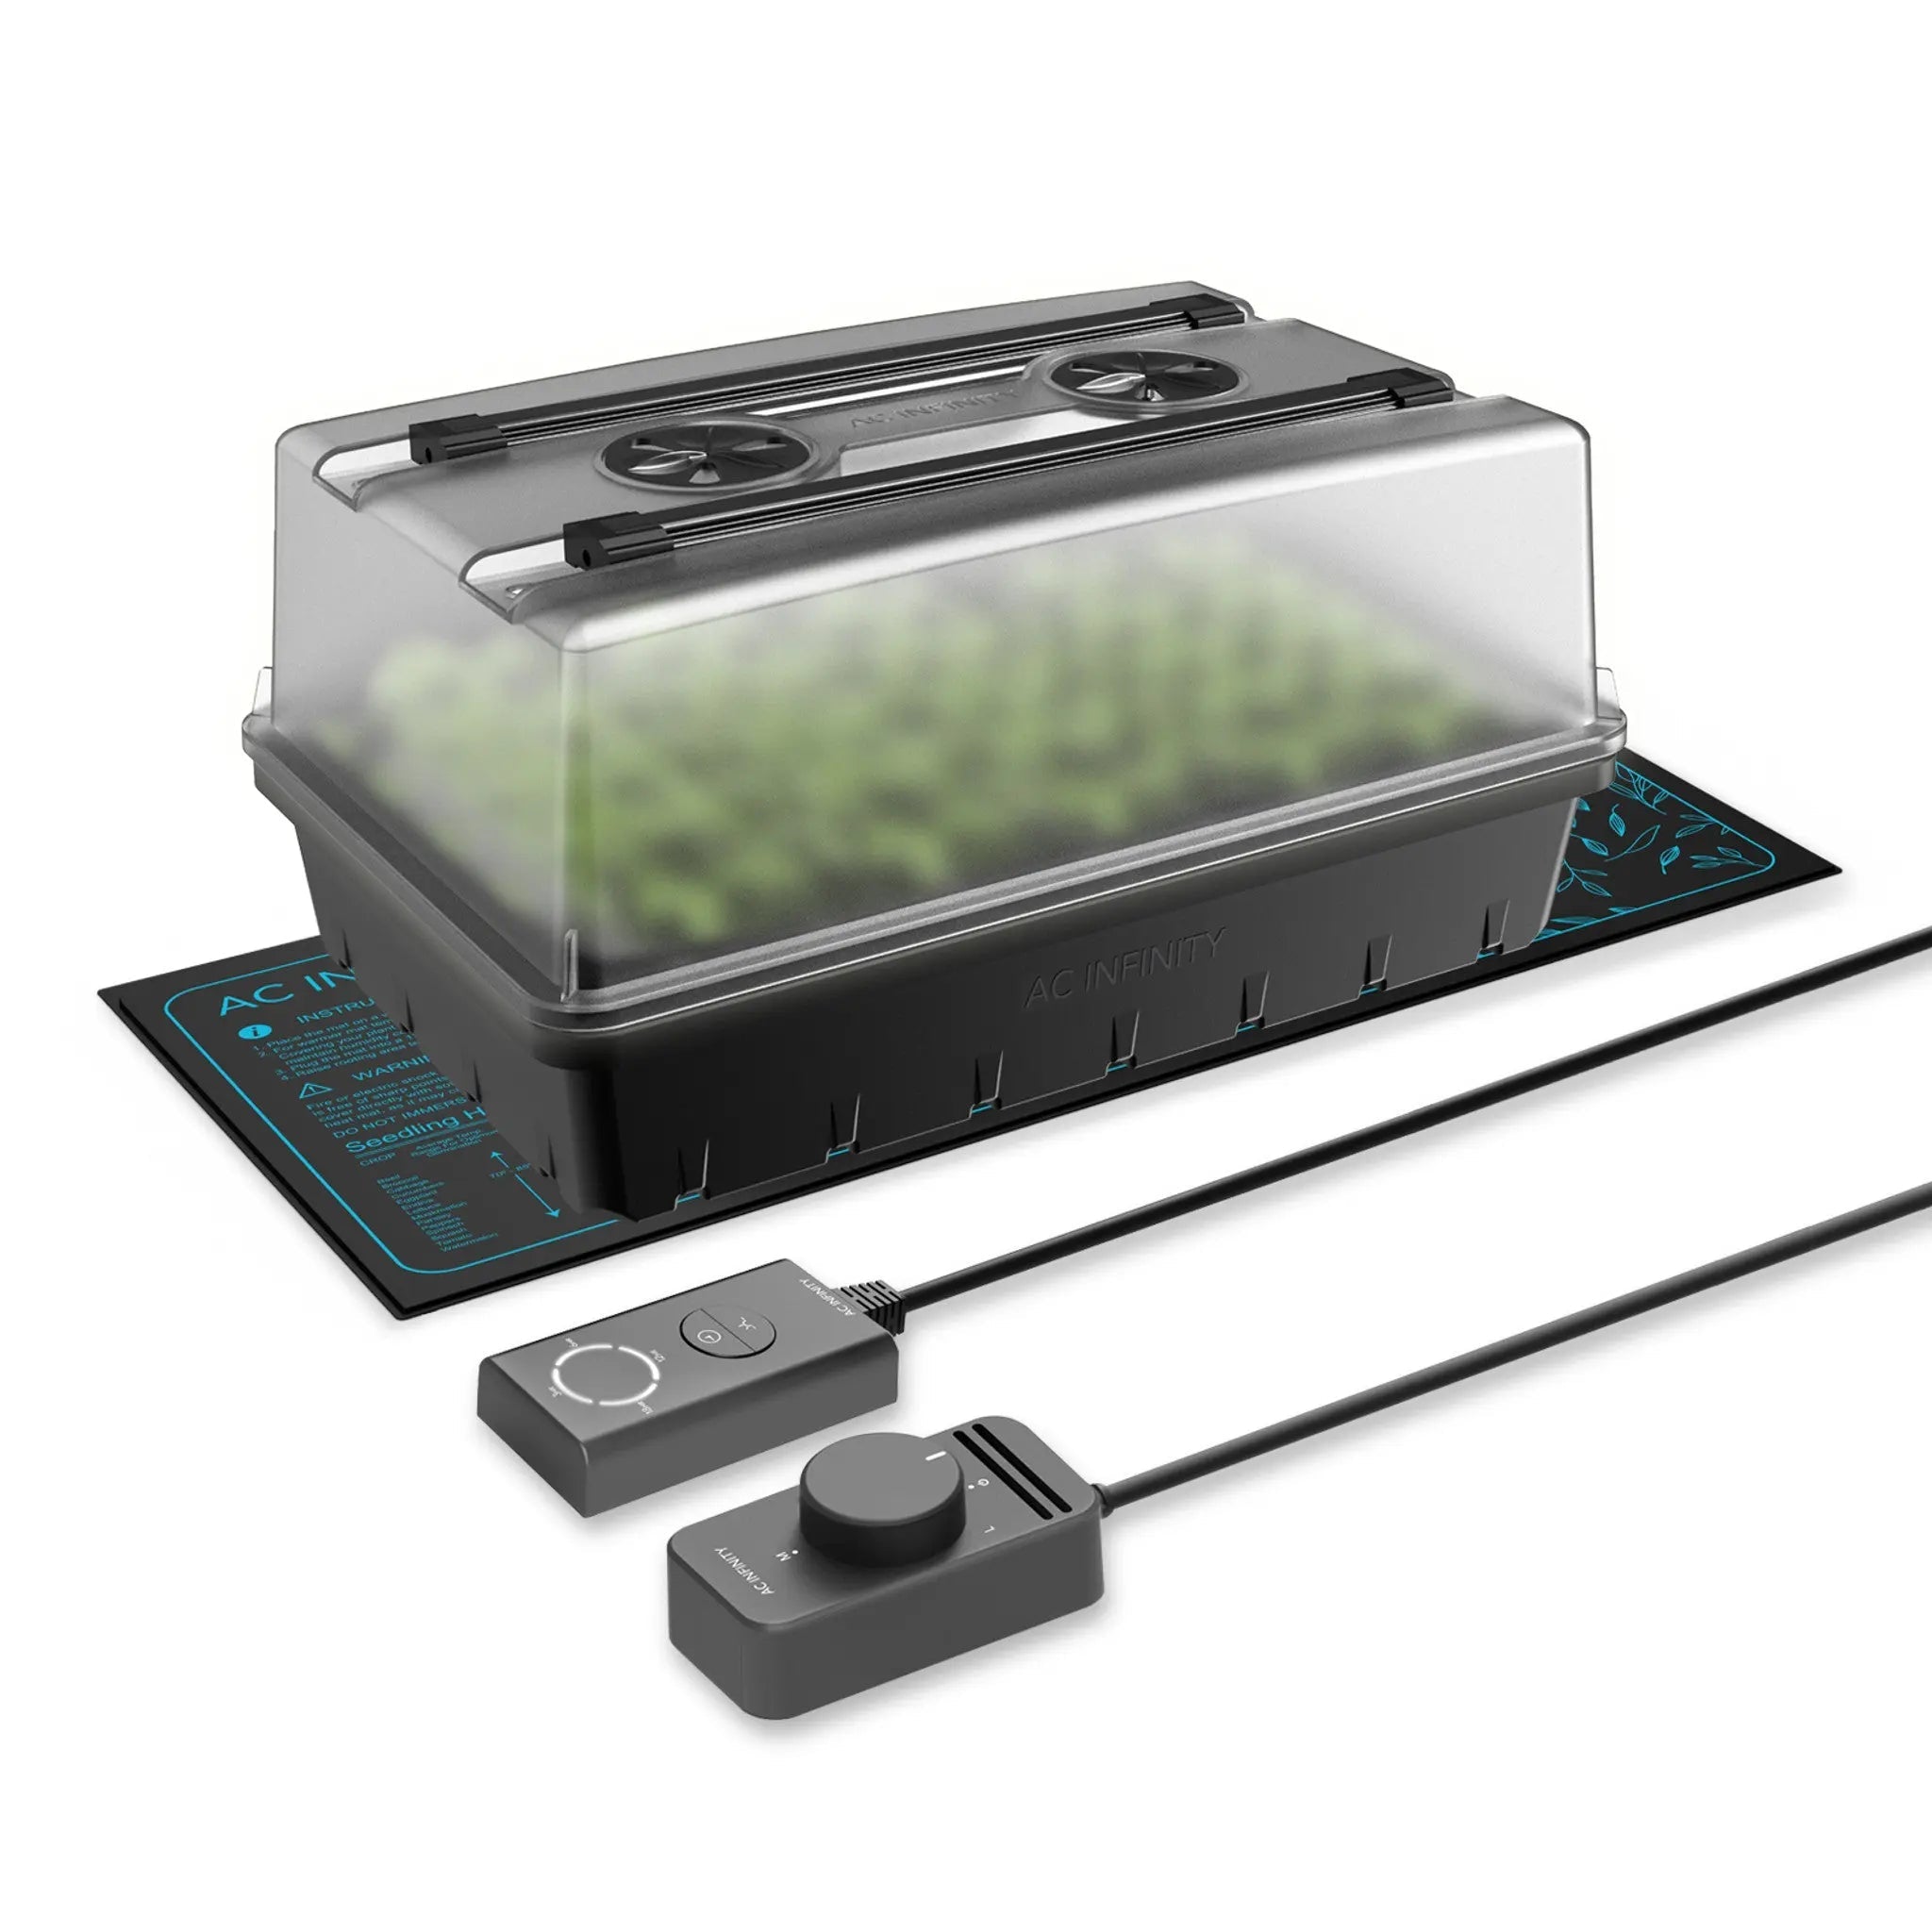 AC Infinity Germination Kit With Seedling Mat and LED Grow Light Bars, 5x8 Cell Tray